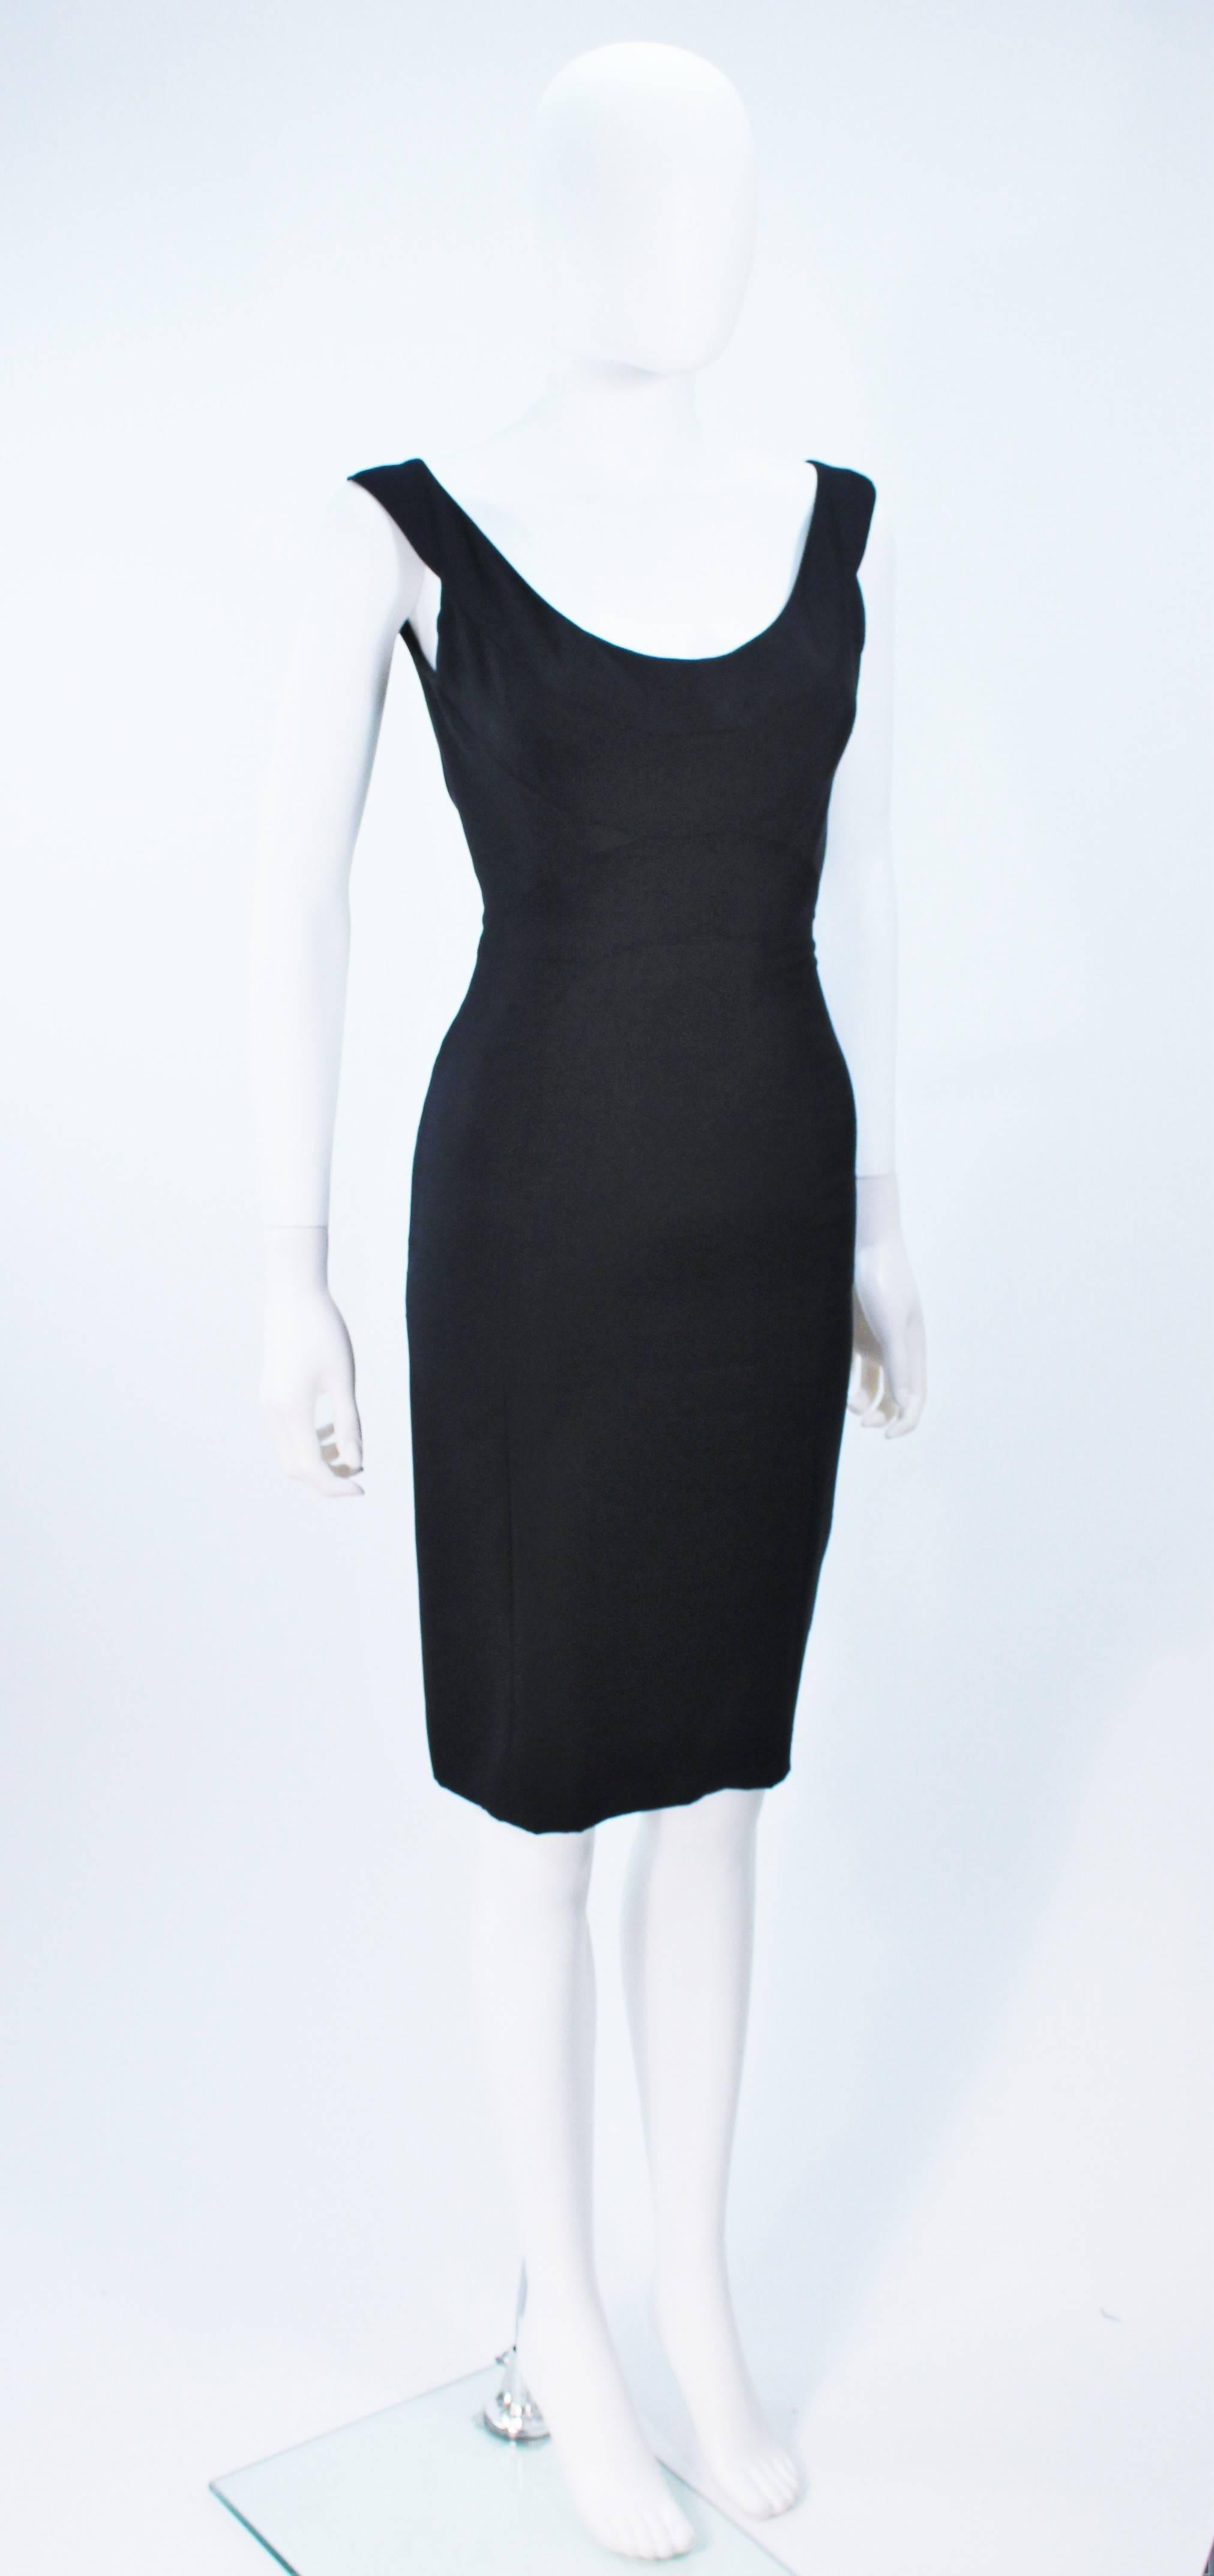 Women's ELIZABETH MASON COUTURE Black Silk Cocktail Dress Made to Order For Sale